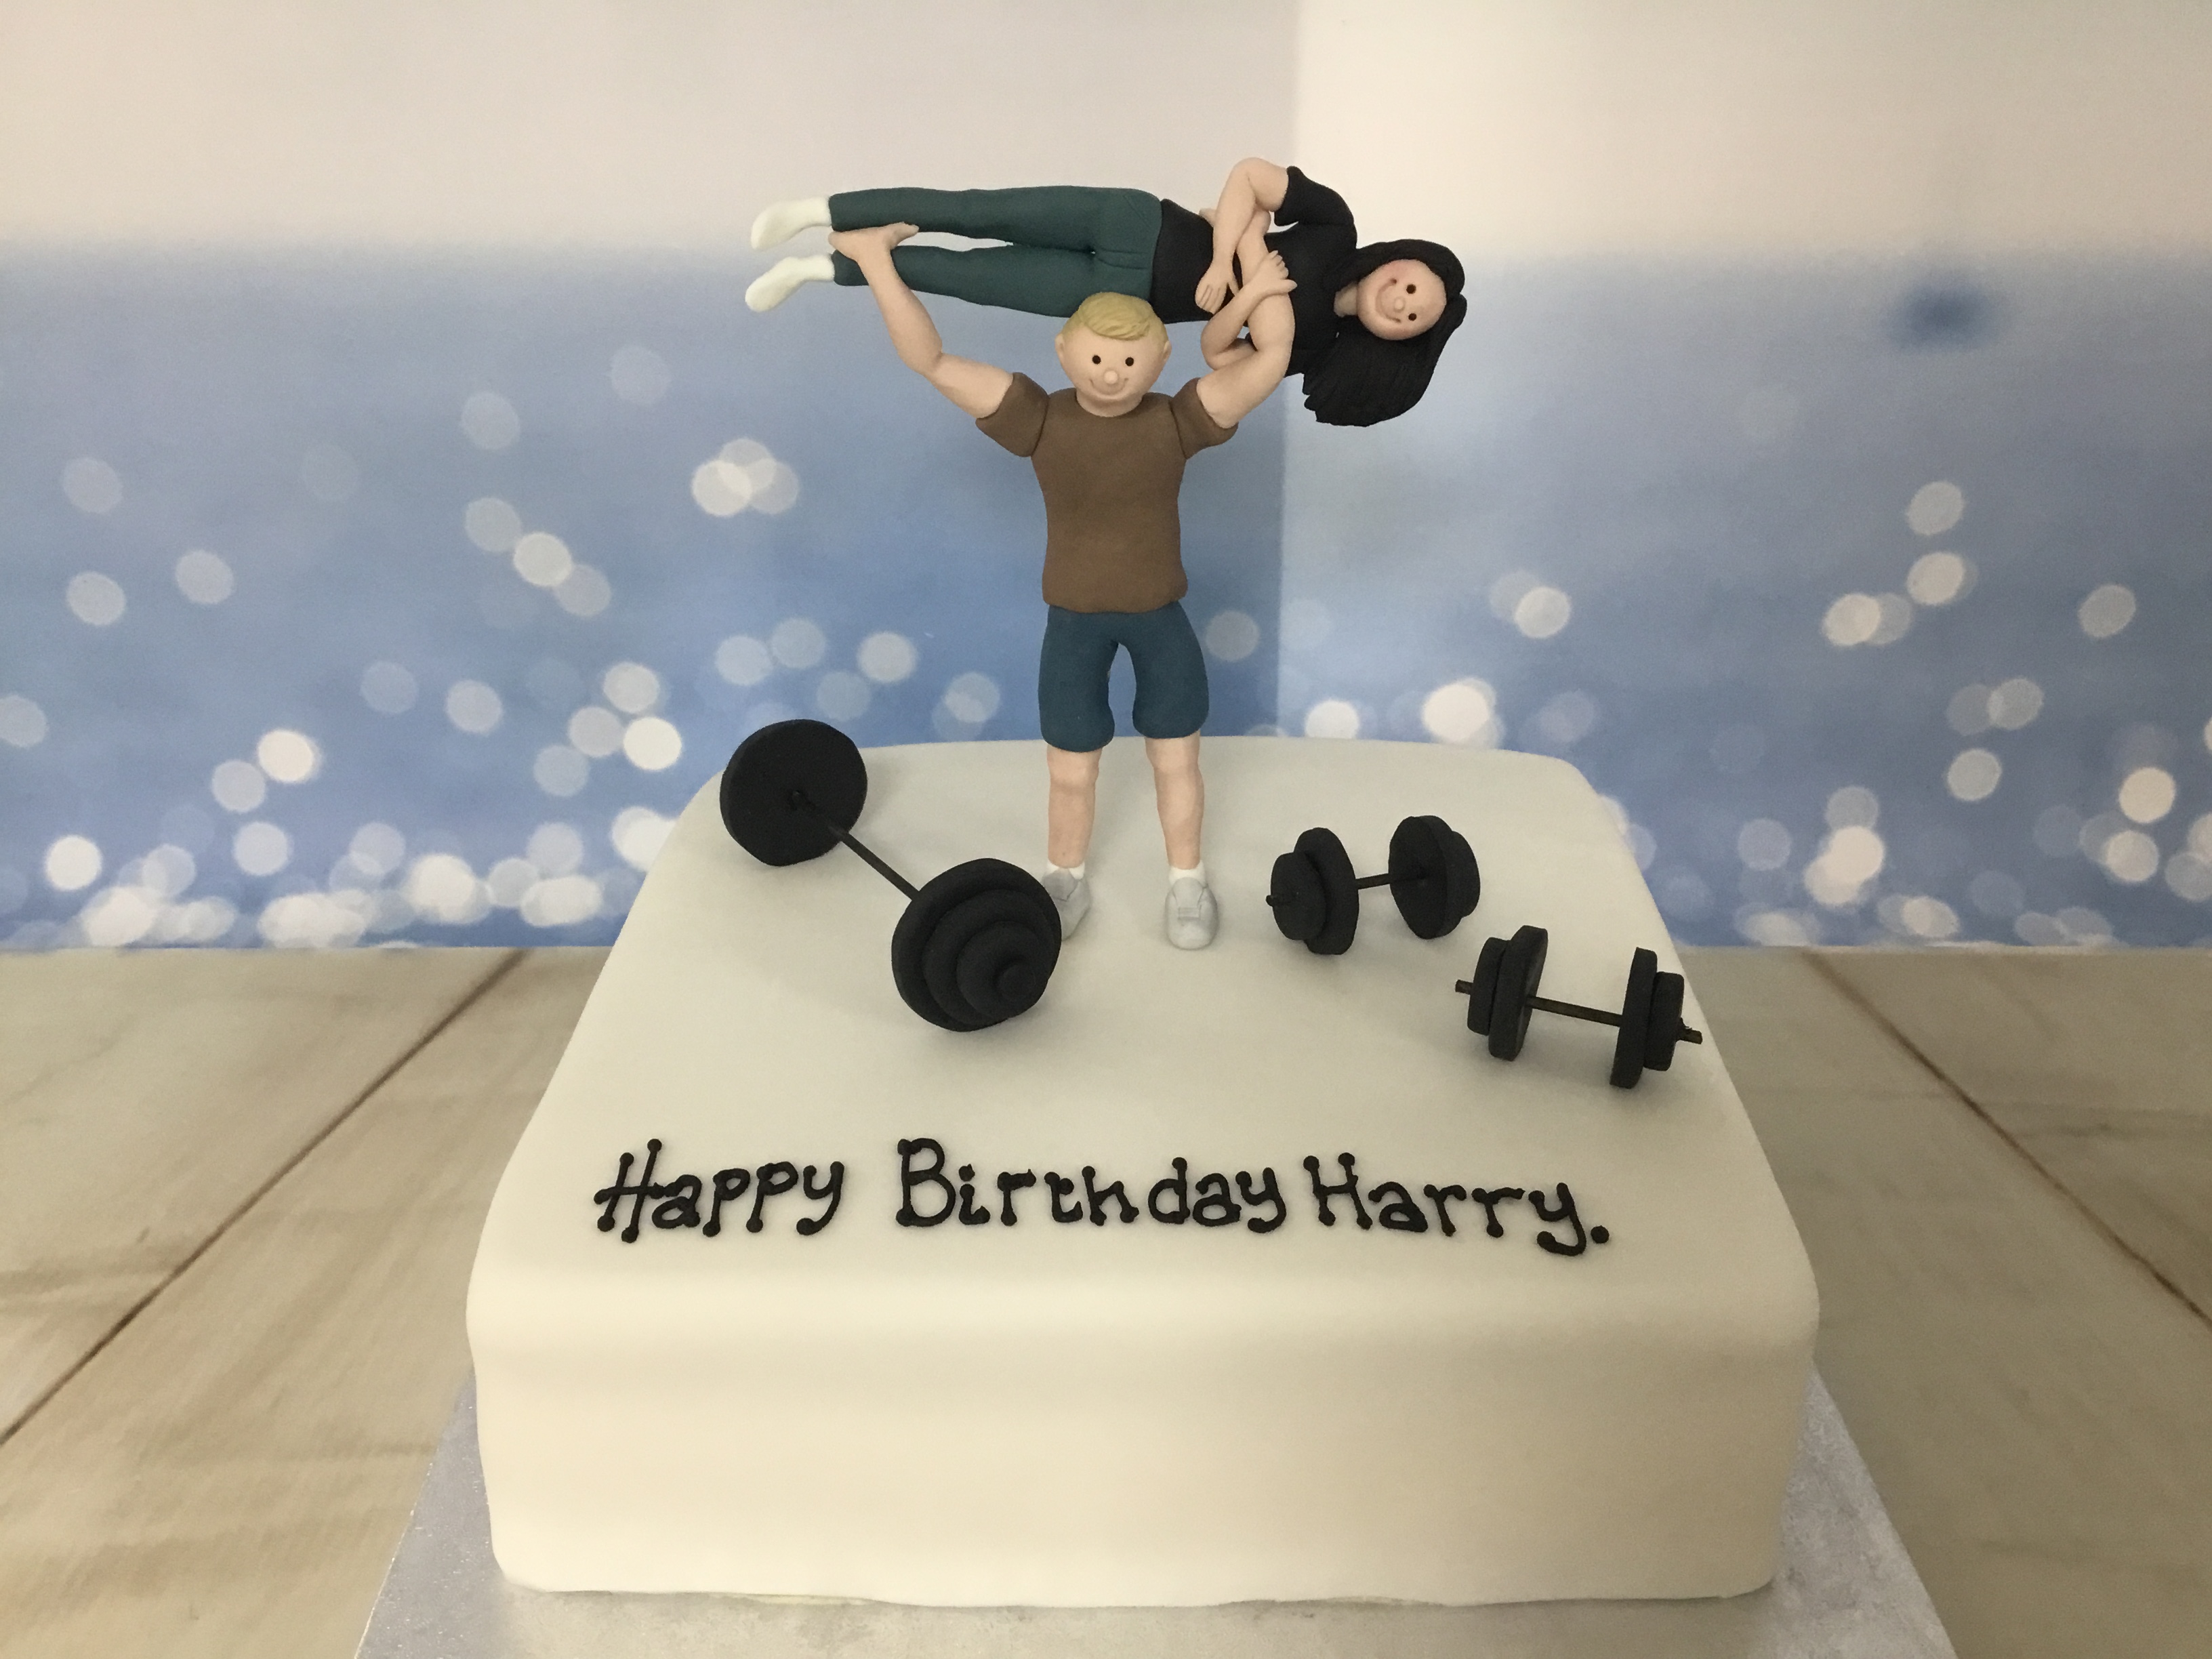 Working out.. | Birthday cakes for men, Gym cake, 40th birthday cakes for  men